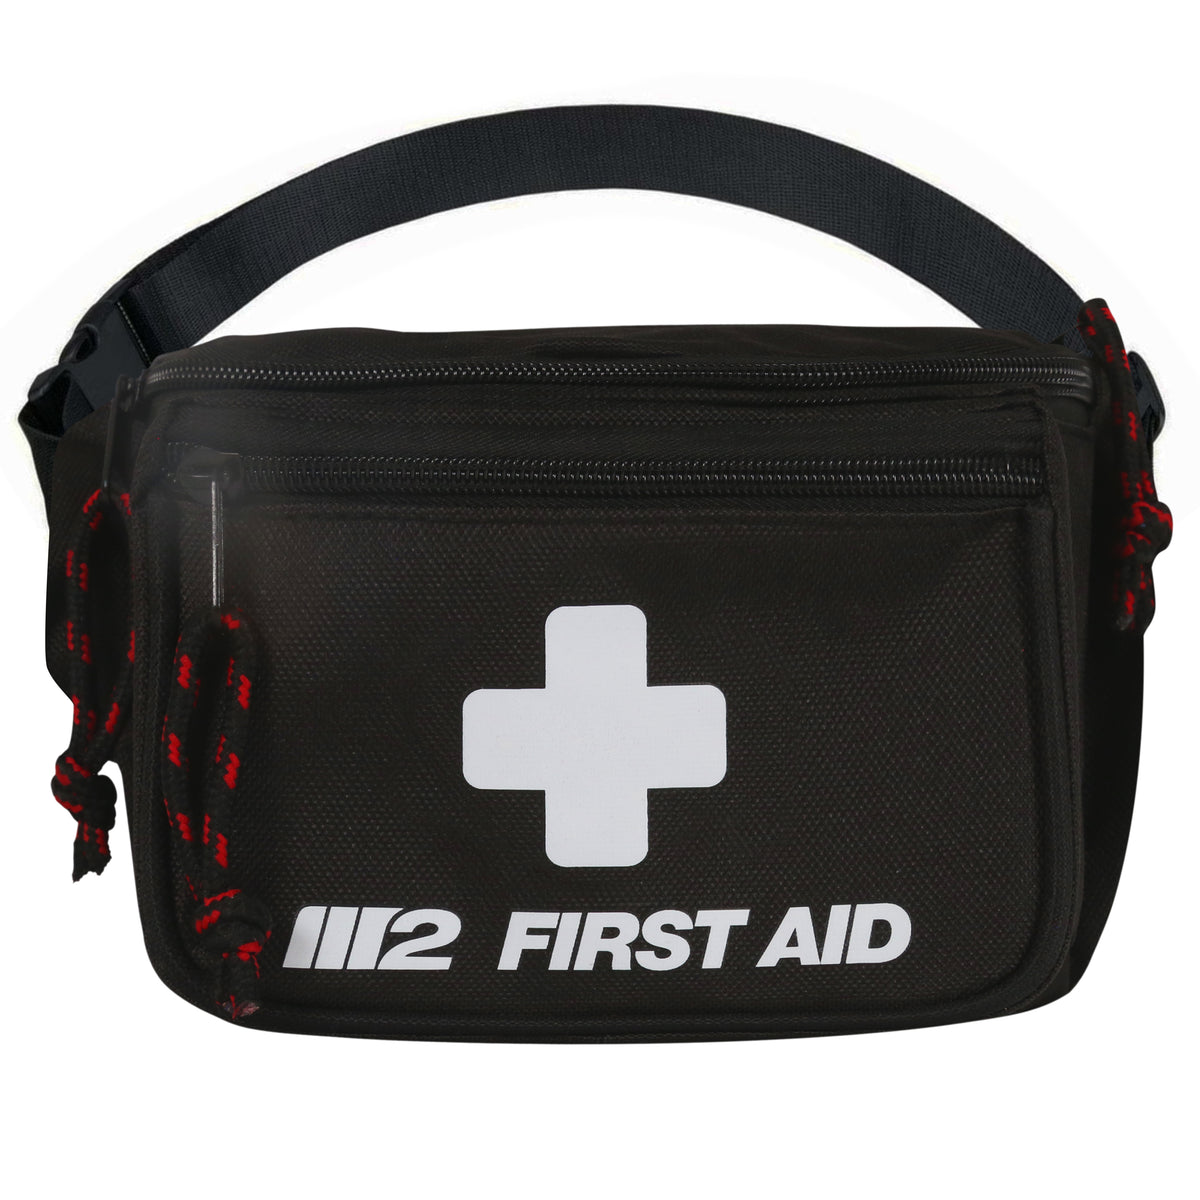  M2 BASICS Professional 300 Piece (40 Unique Items) First Aid Kit, Emergency Medical Kits